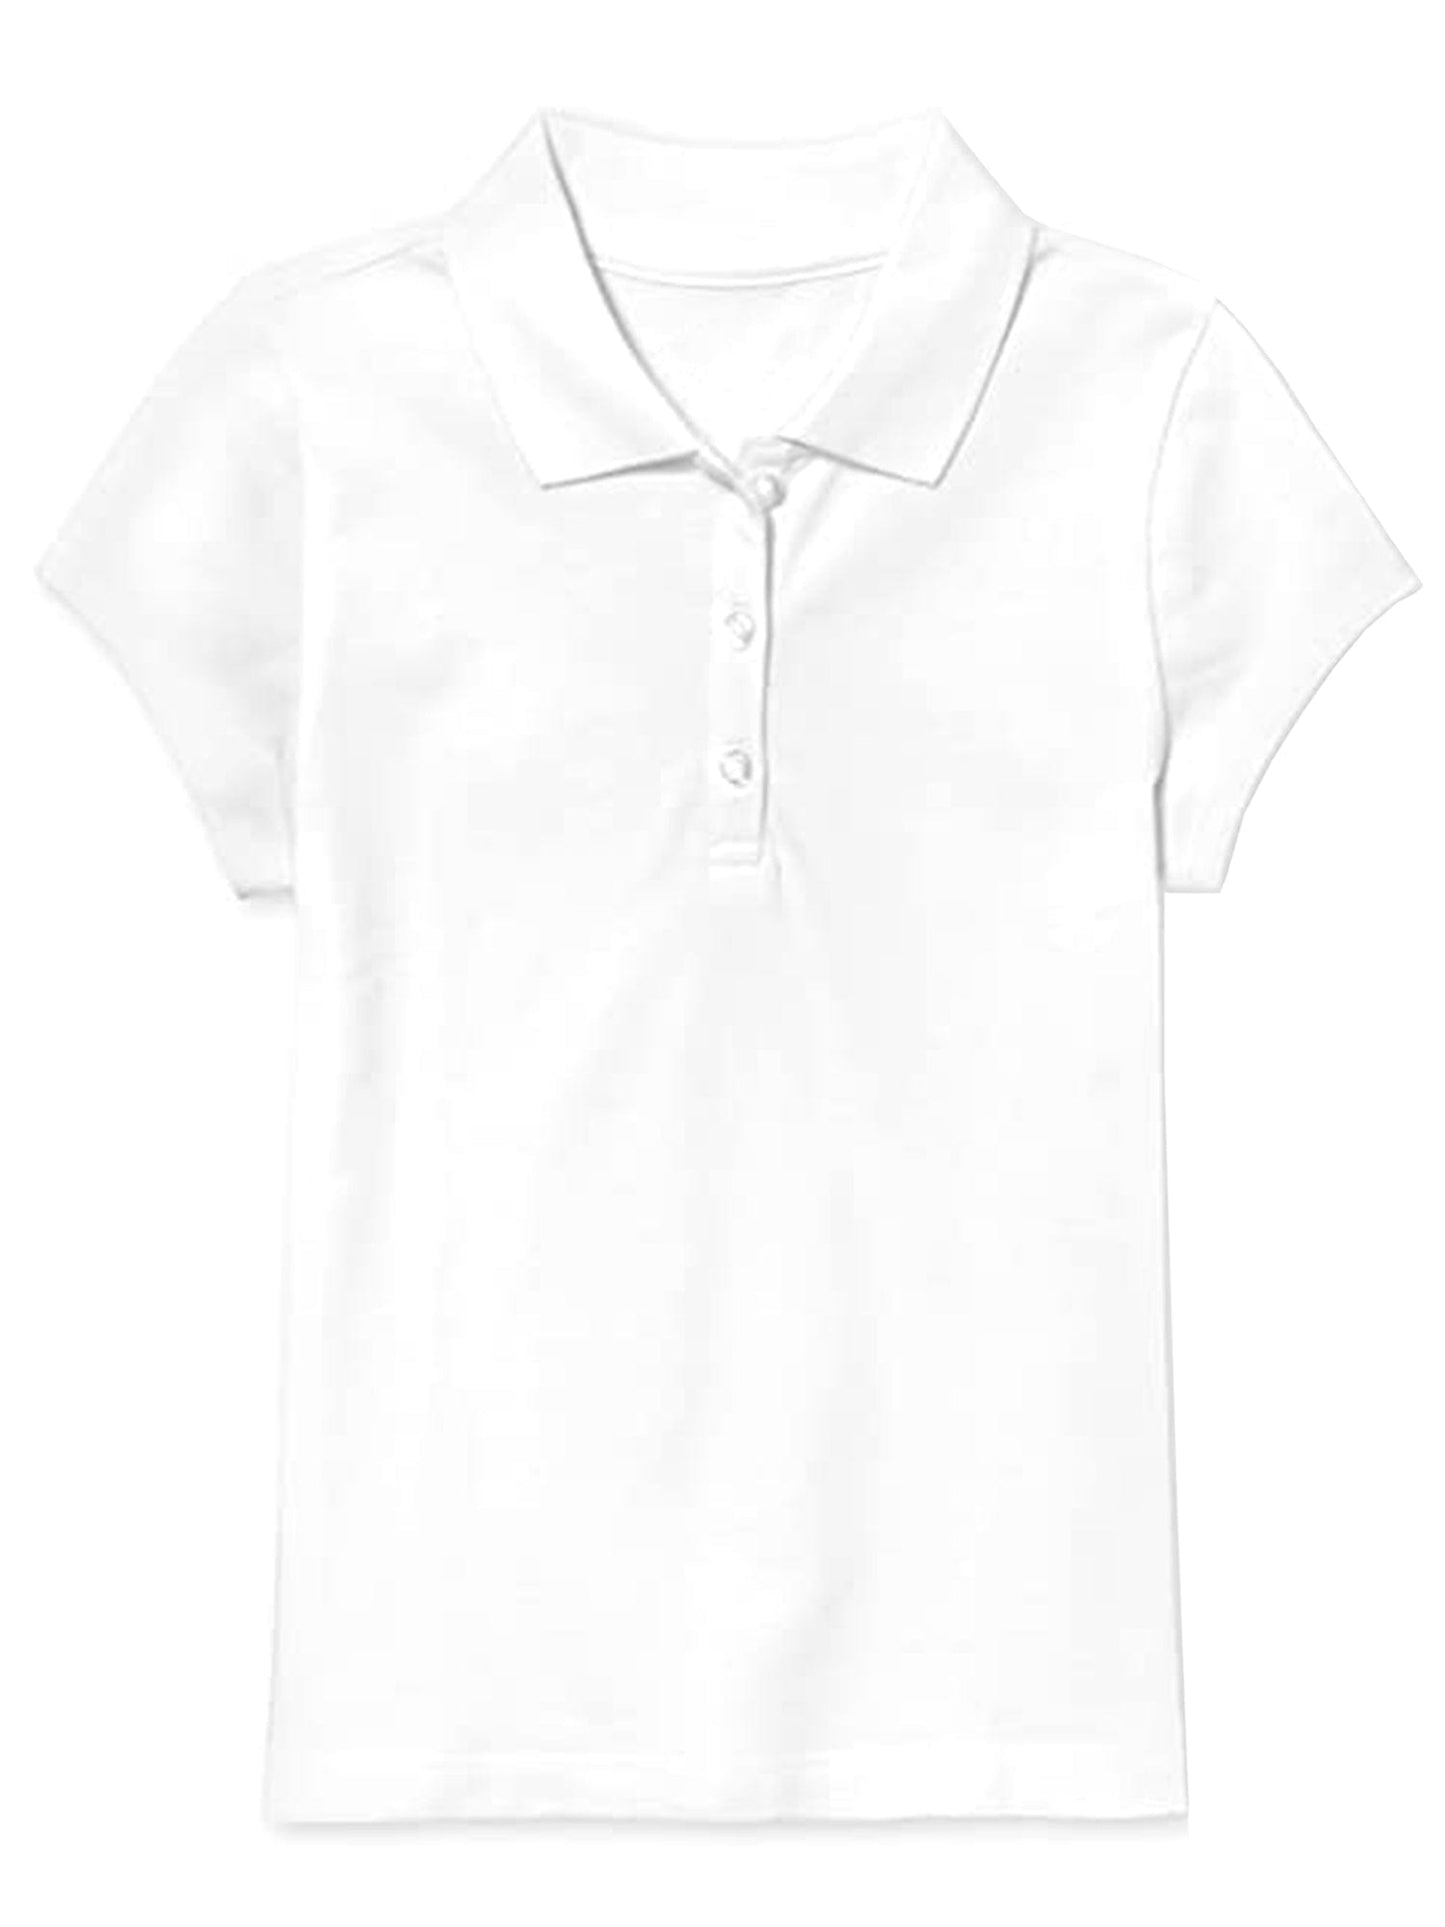 Girl's Short Sleeve Polo Shirt (Sizes S-2X) - GalaxybyHarvic